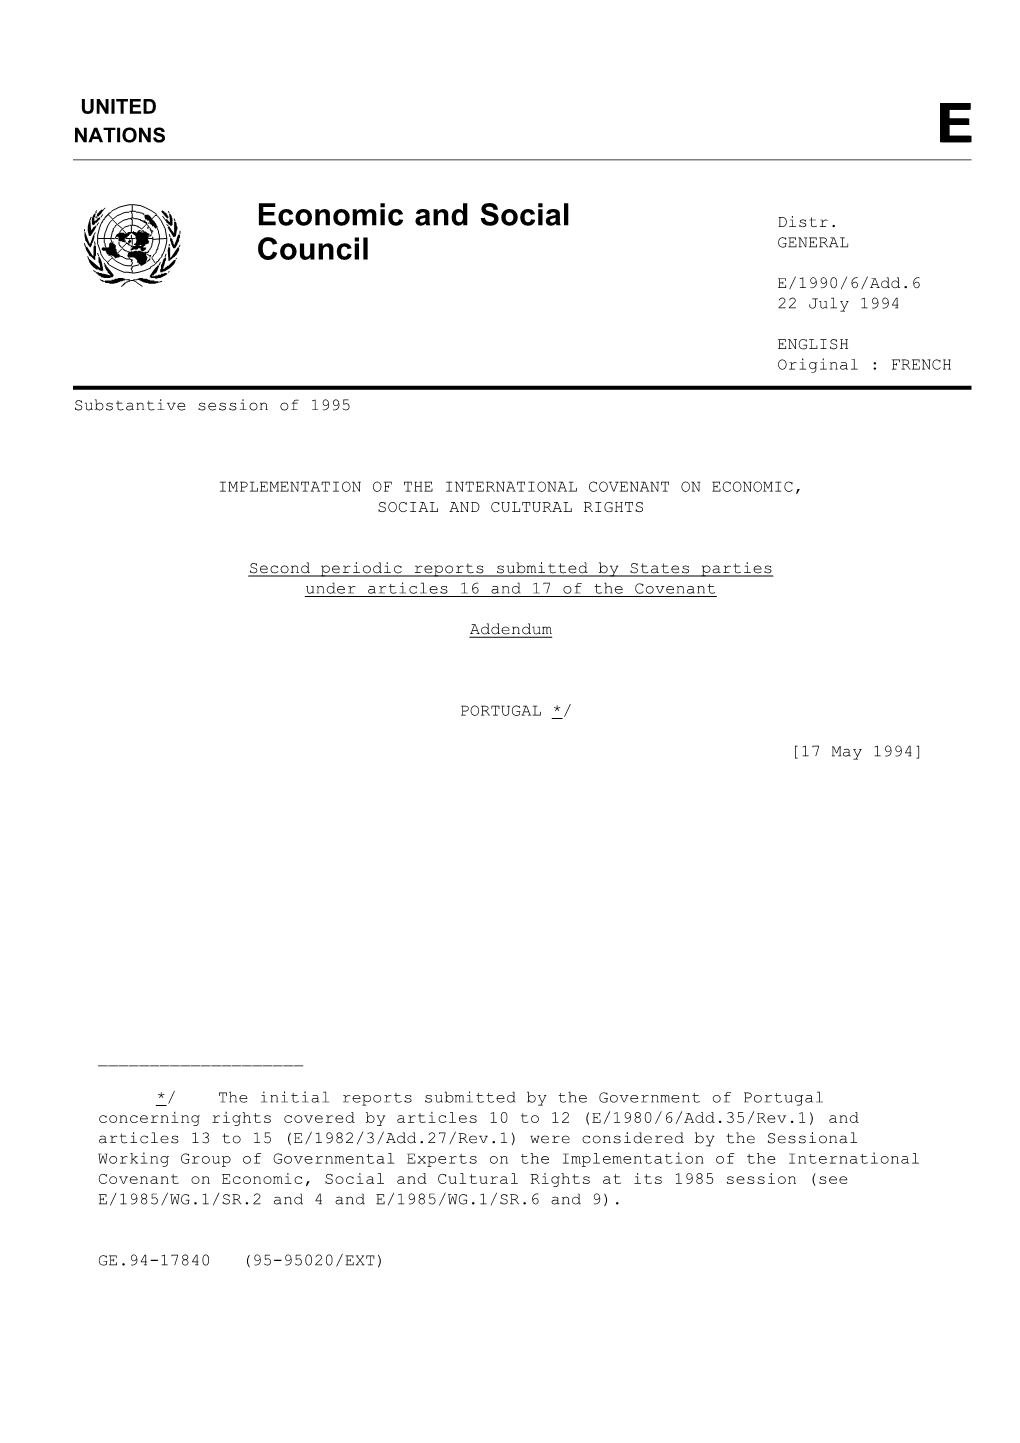 Economic and Social Council, Conceived As an Organ for Consultation and Dialogue on Economic and Social Policies and Invested with E/1990/6/Add.6 Page 28